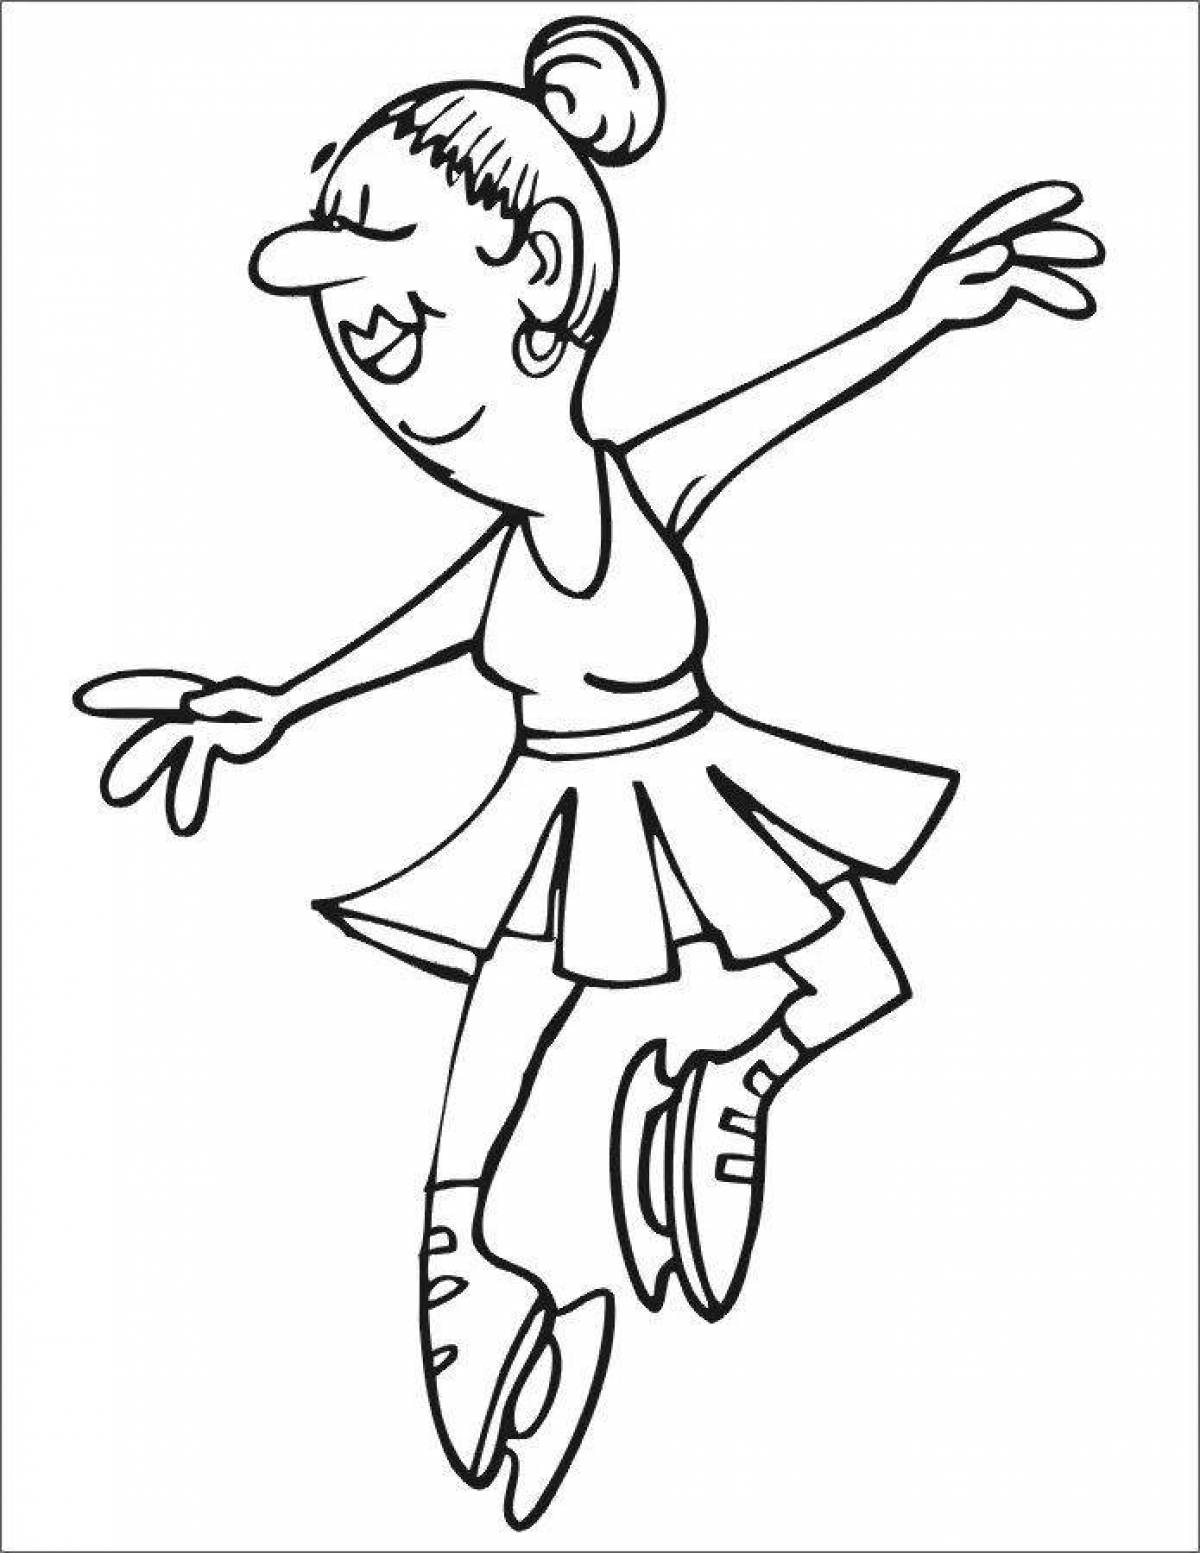 Animated figure skater coloring book for kids